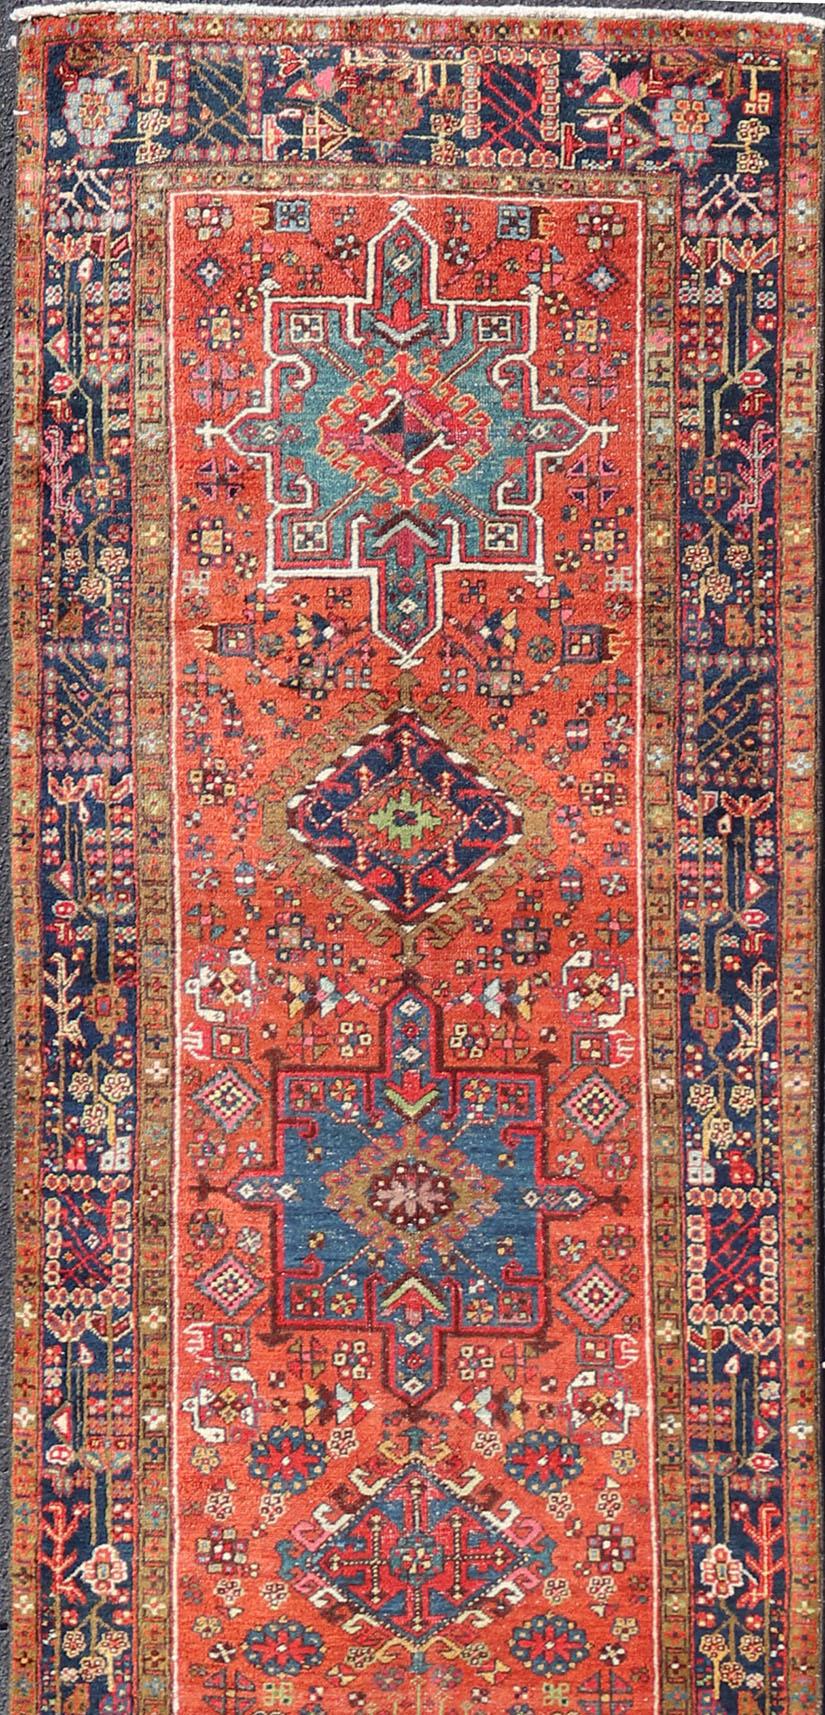 Very Long antique Persian Heriz runner with geometric medallion design in red, blue and colorful tones. Keivan Woven Arts / rug EMB-9560-P13076 , country of origin / type: Iran / Heriz, circa 1900

Measures:3'4 x 14'4.